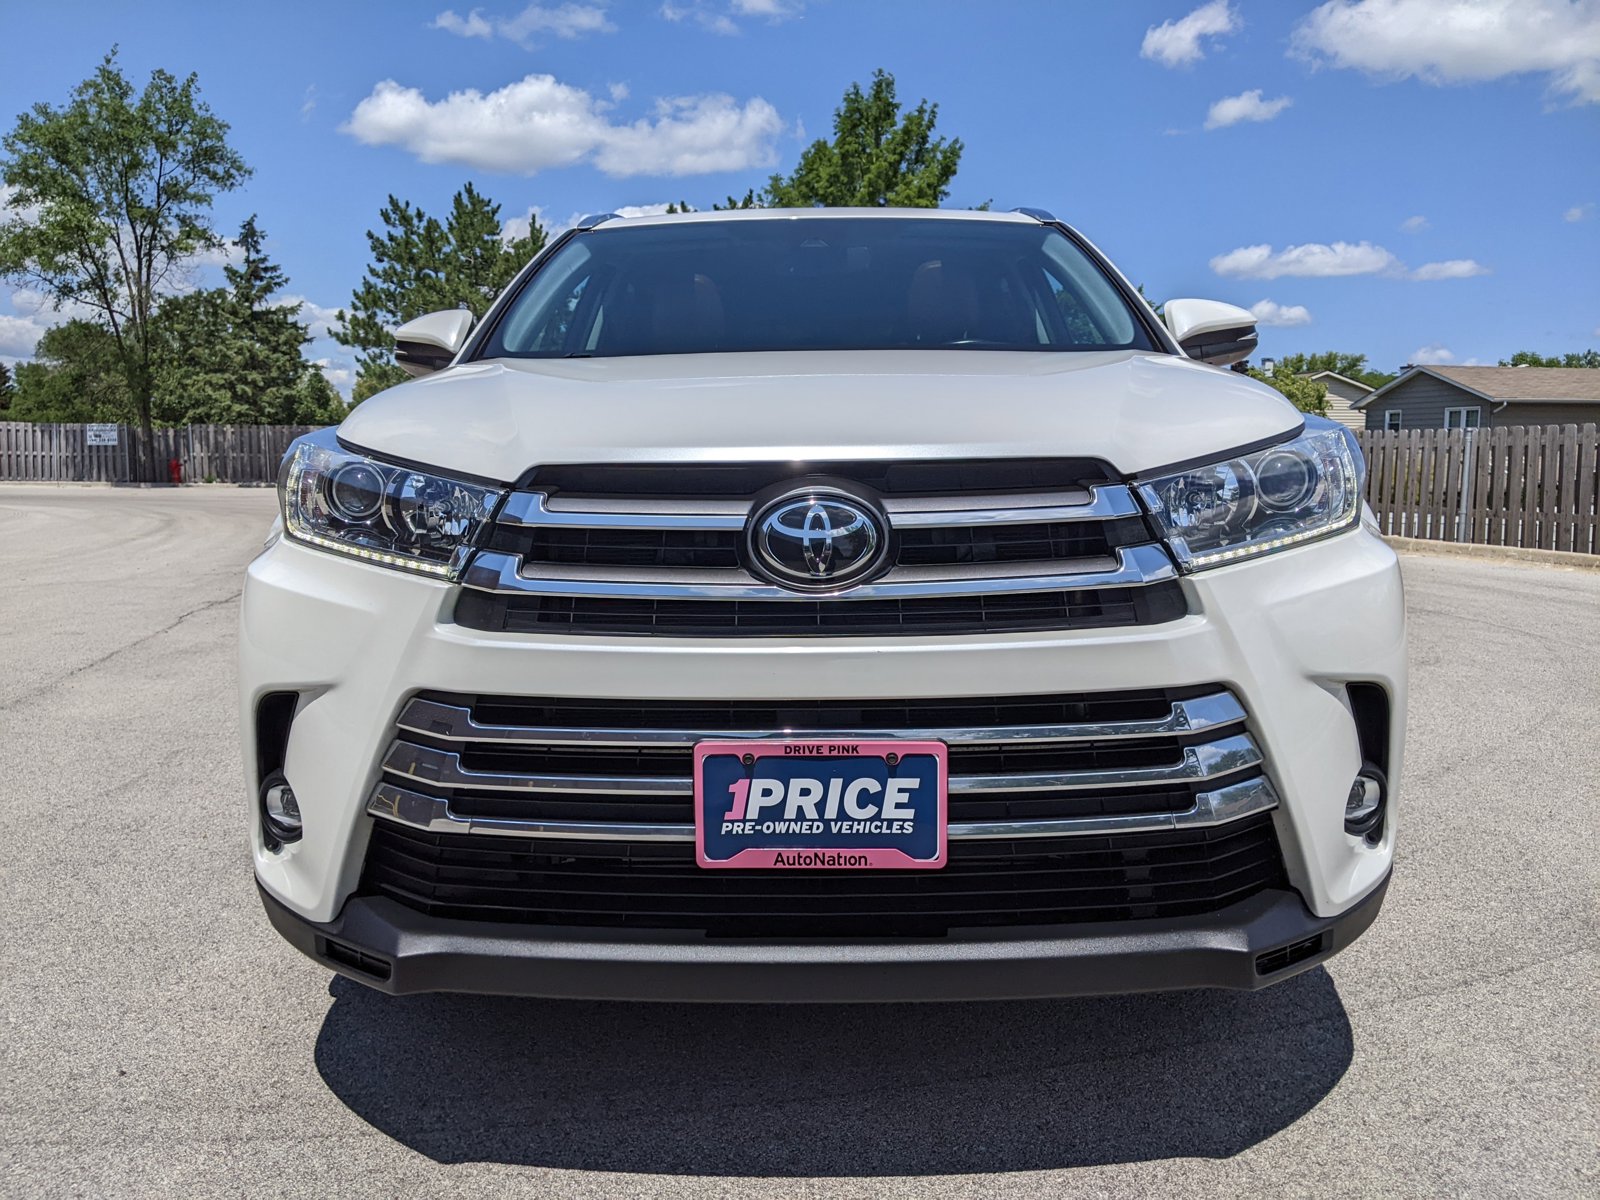 Used 2019 Toyota Highlander Limited with VIN 5TDDZRFH4KS987436 for sale in Des Plaines, IL